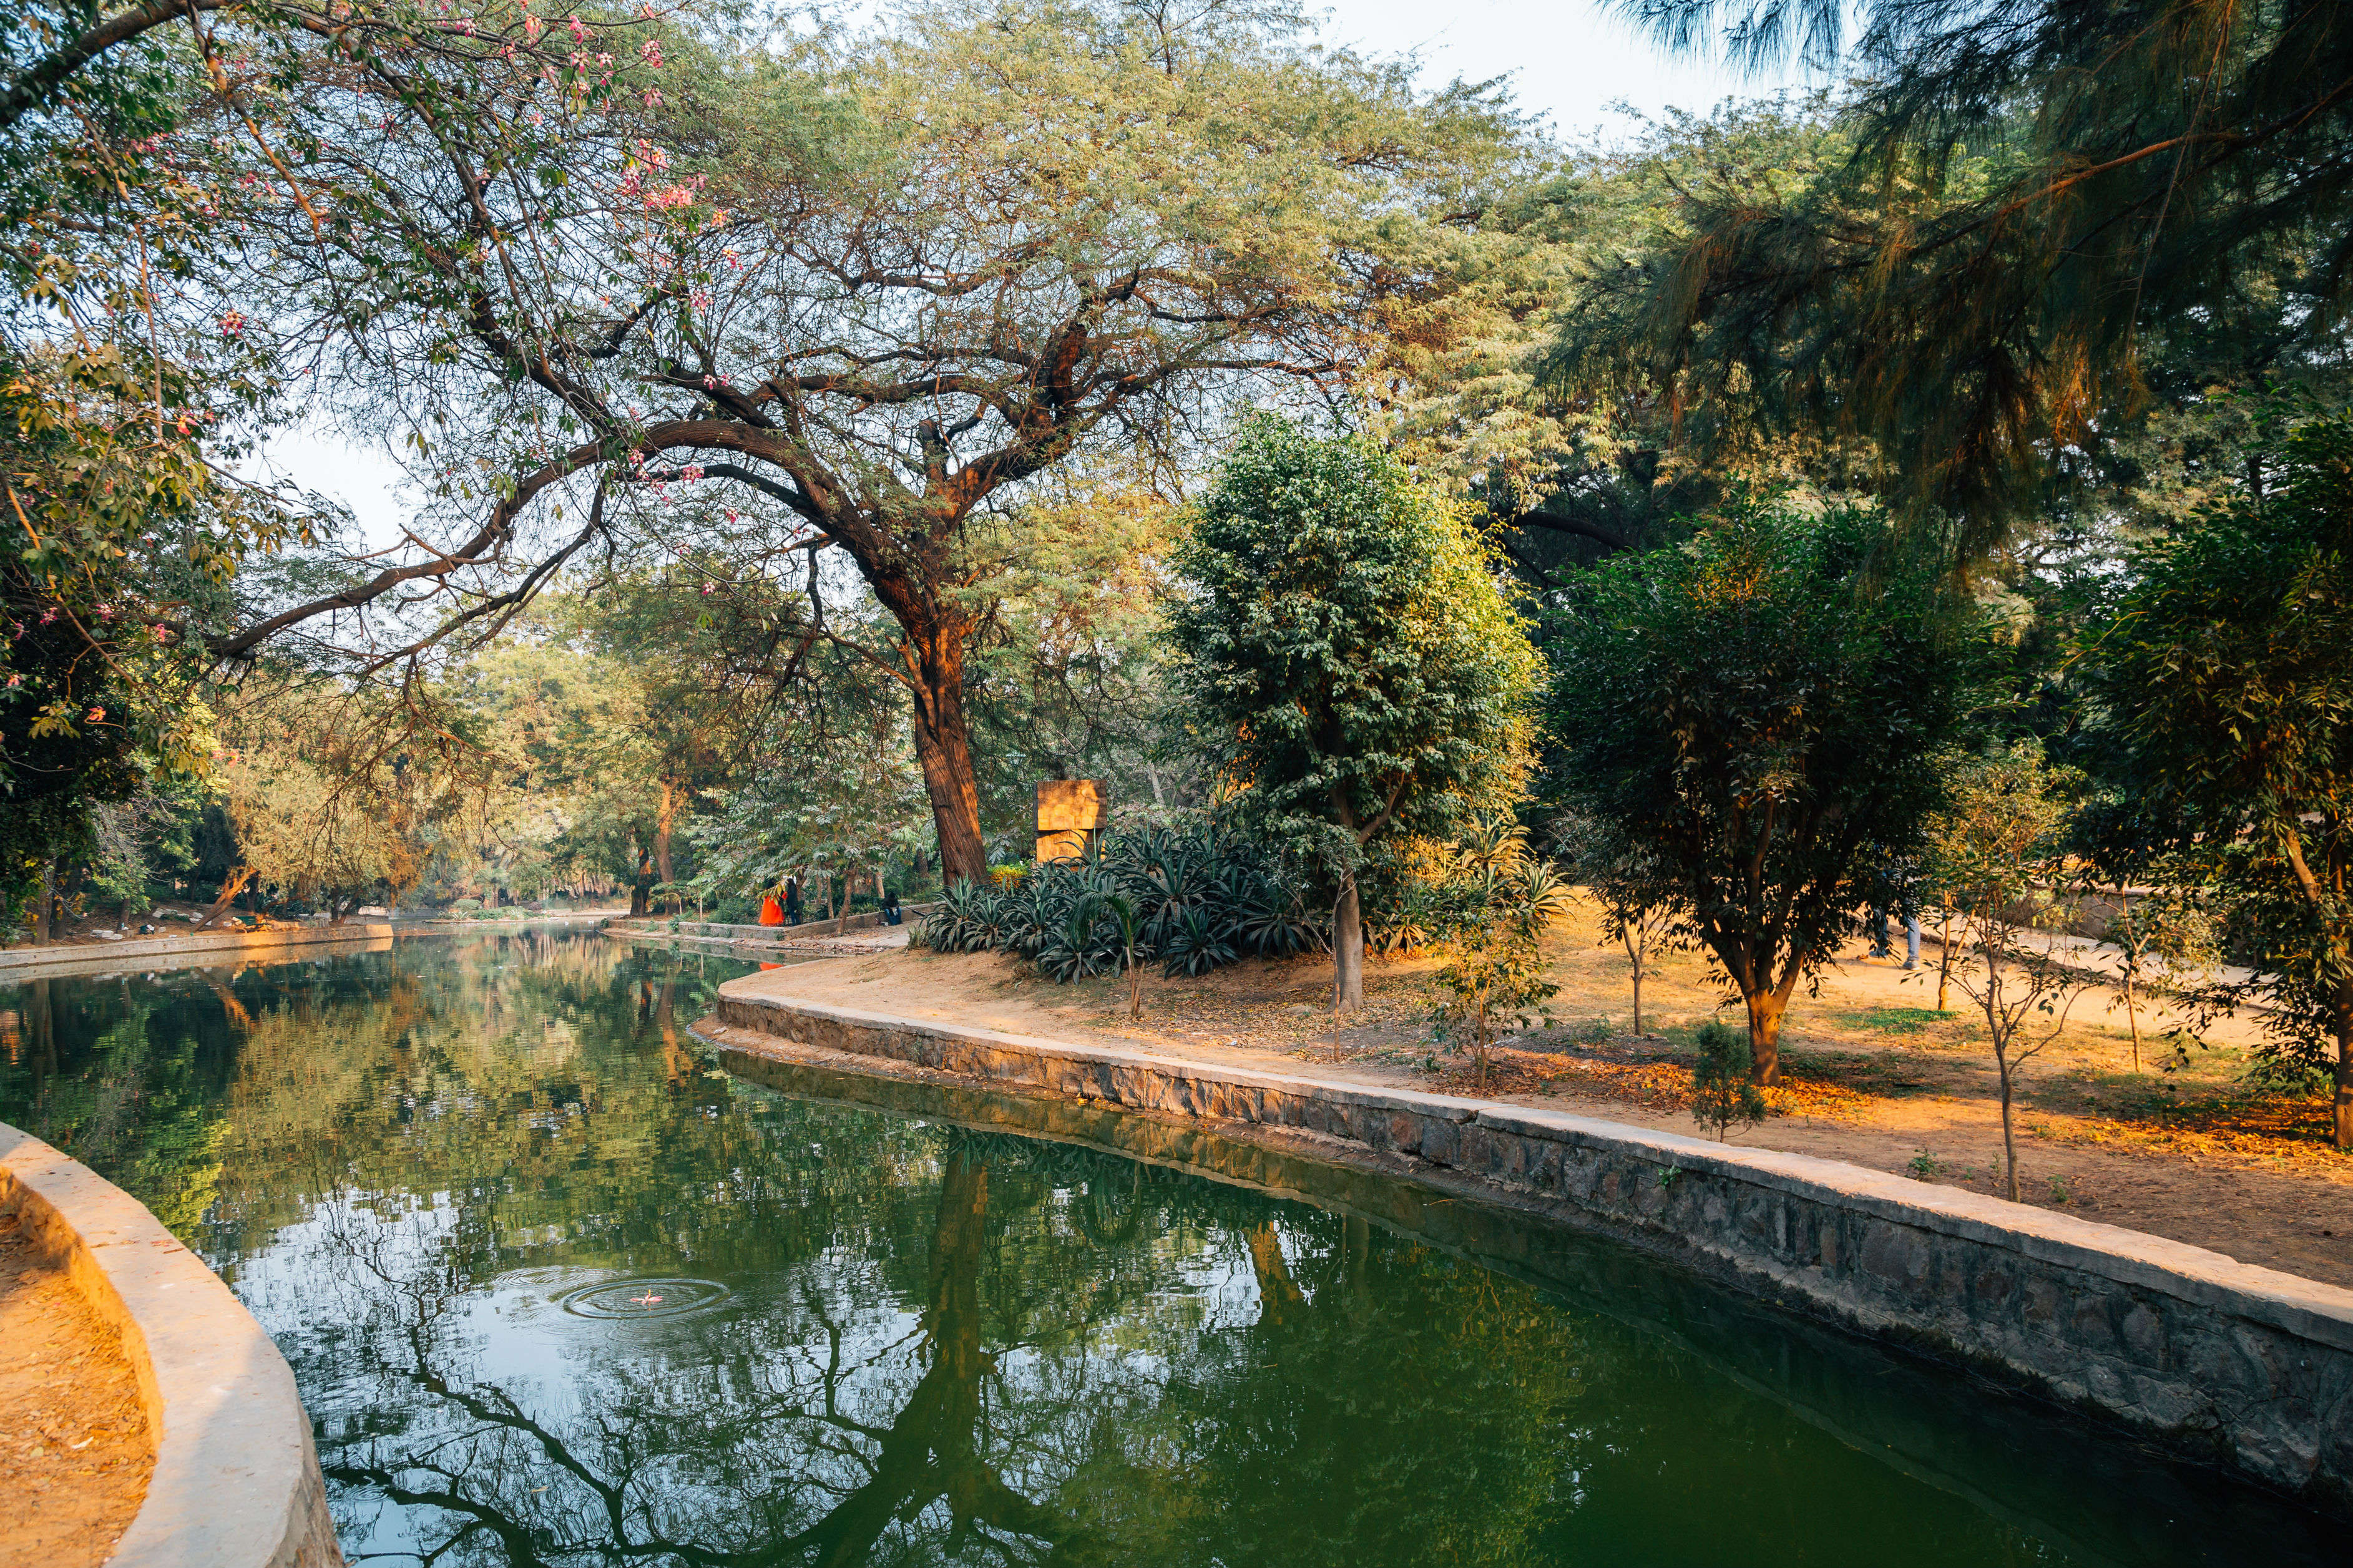 Delhi’s green spaces for an incredible day out